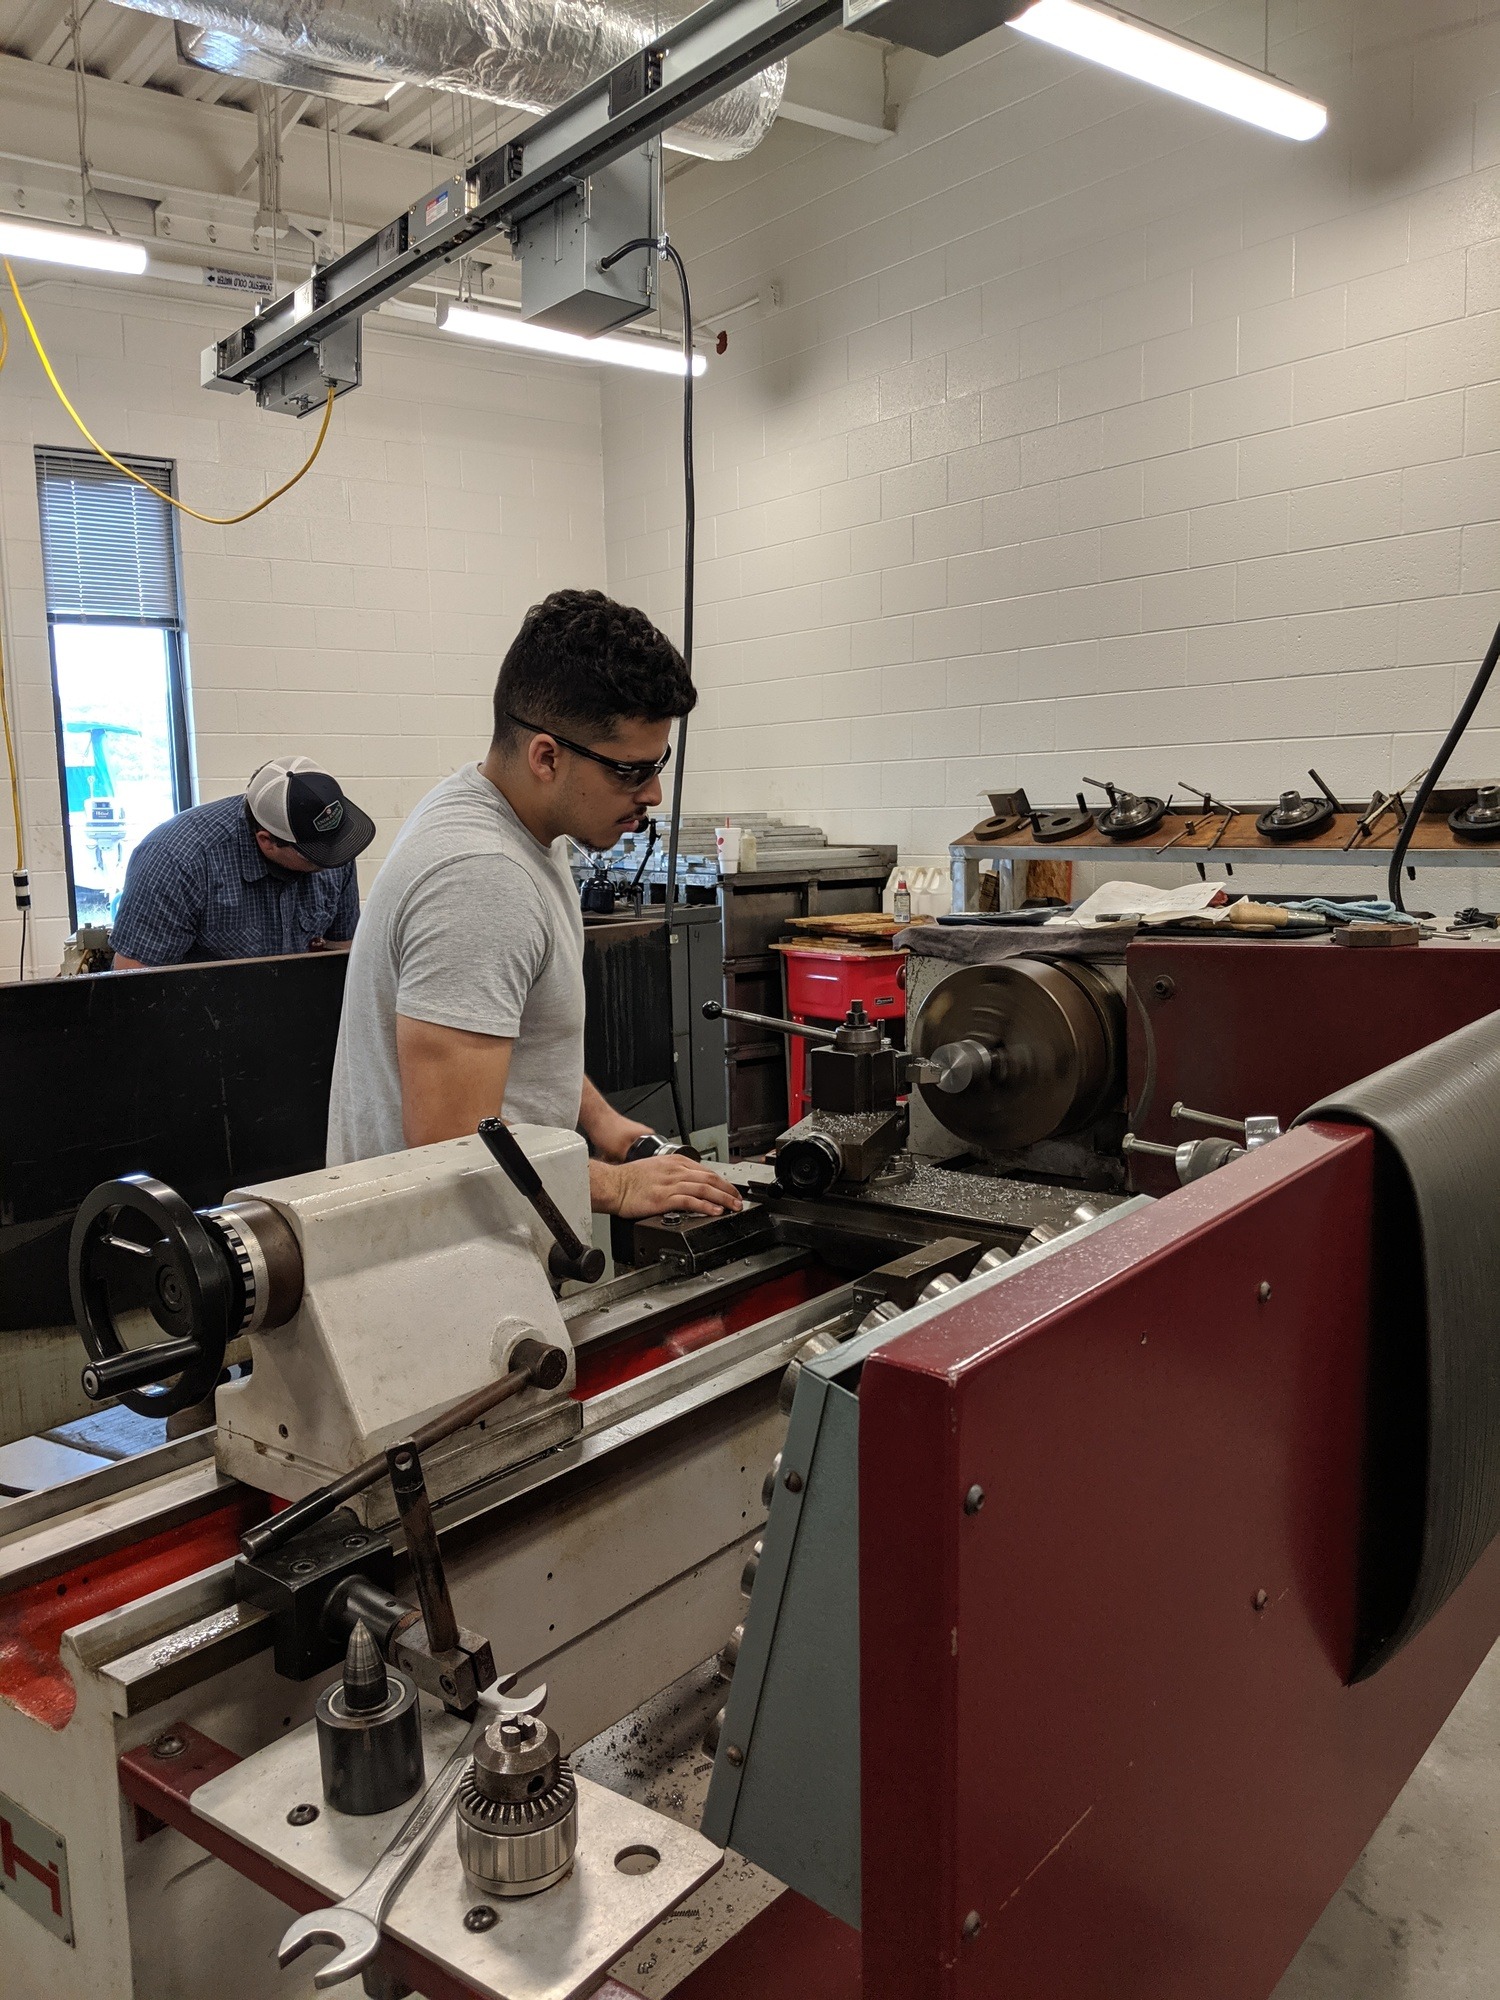 Precision Machining and Manufacturing students